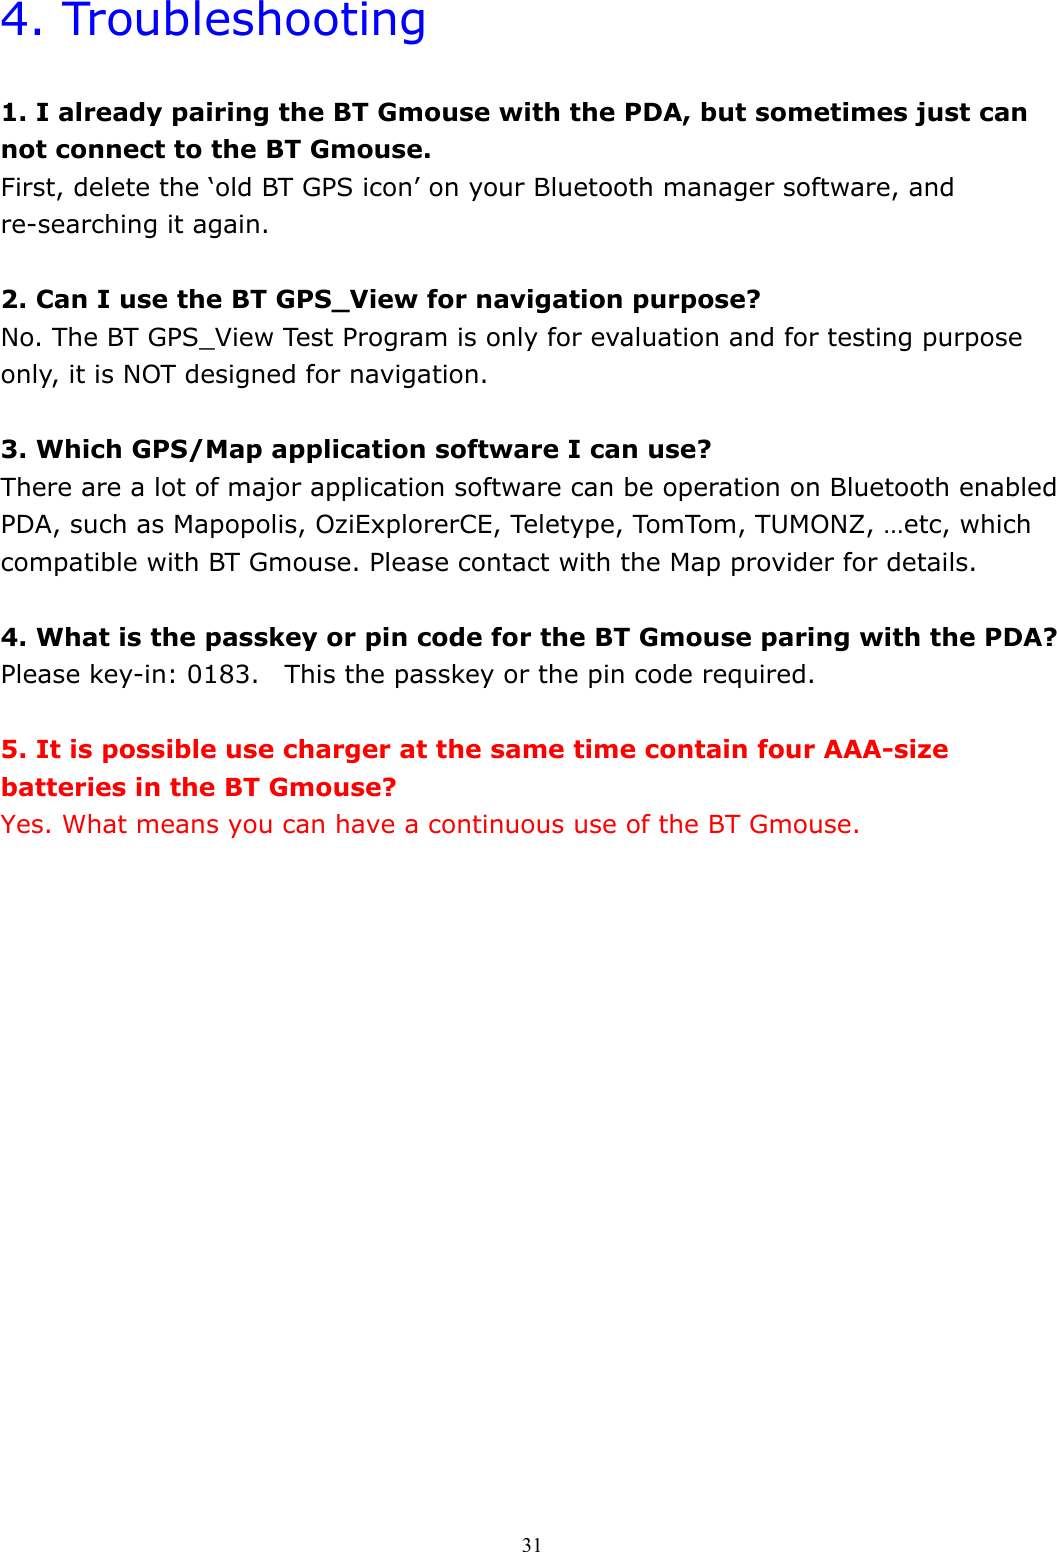  314. Troubleshooting  1. I already pairing the BT Gmouse with the PDA, but sometimes just can not connect to the BT Gmouse. First, delete the ‘old BT GPS icon’ on your Bluetooth manager software, and re-searching it again.  2. Can I use the BT GPS_View for navigation purpose? No. The BT GPS_View Test Program is only for evaluation and for testing purpose only, it is NOT designed for navigation.  3. Which GPS/Map application software I can use? There are a lot of major application software can be operation on Bluetooth enabled PDA, such as Mapopolis, OziExplorerCE, Teletype, TomTom, TUMONZ, …etc, which compatible with BT Gmouse. Please contact with the Map provider for details.  4. What is the passkey or pin code for the BT Gmouse paring with the PDA? Please key-in: 0183.    This the passkey or the pin code required.  5. It is possible use charger at the same time contain four AAA-size batteries in the BT Gmouse? Yes. What means you can have a continuous use of the BT Gmouse.  